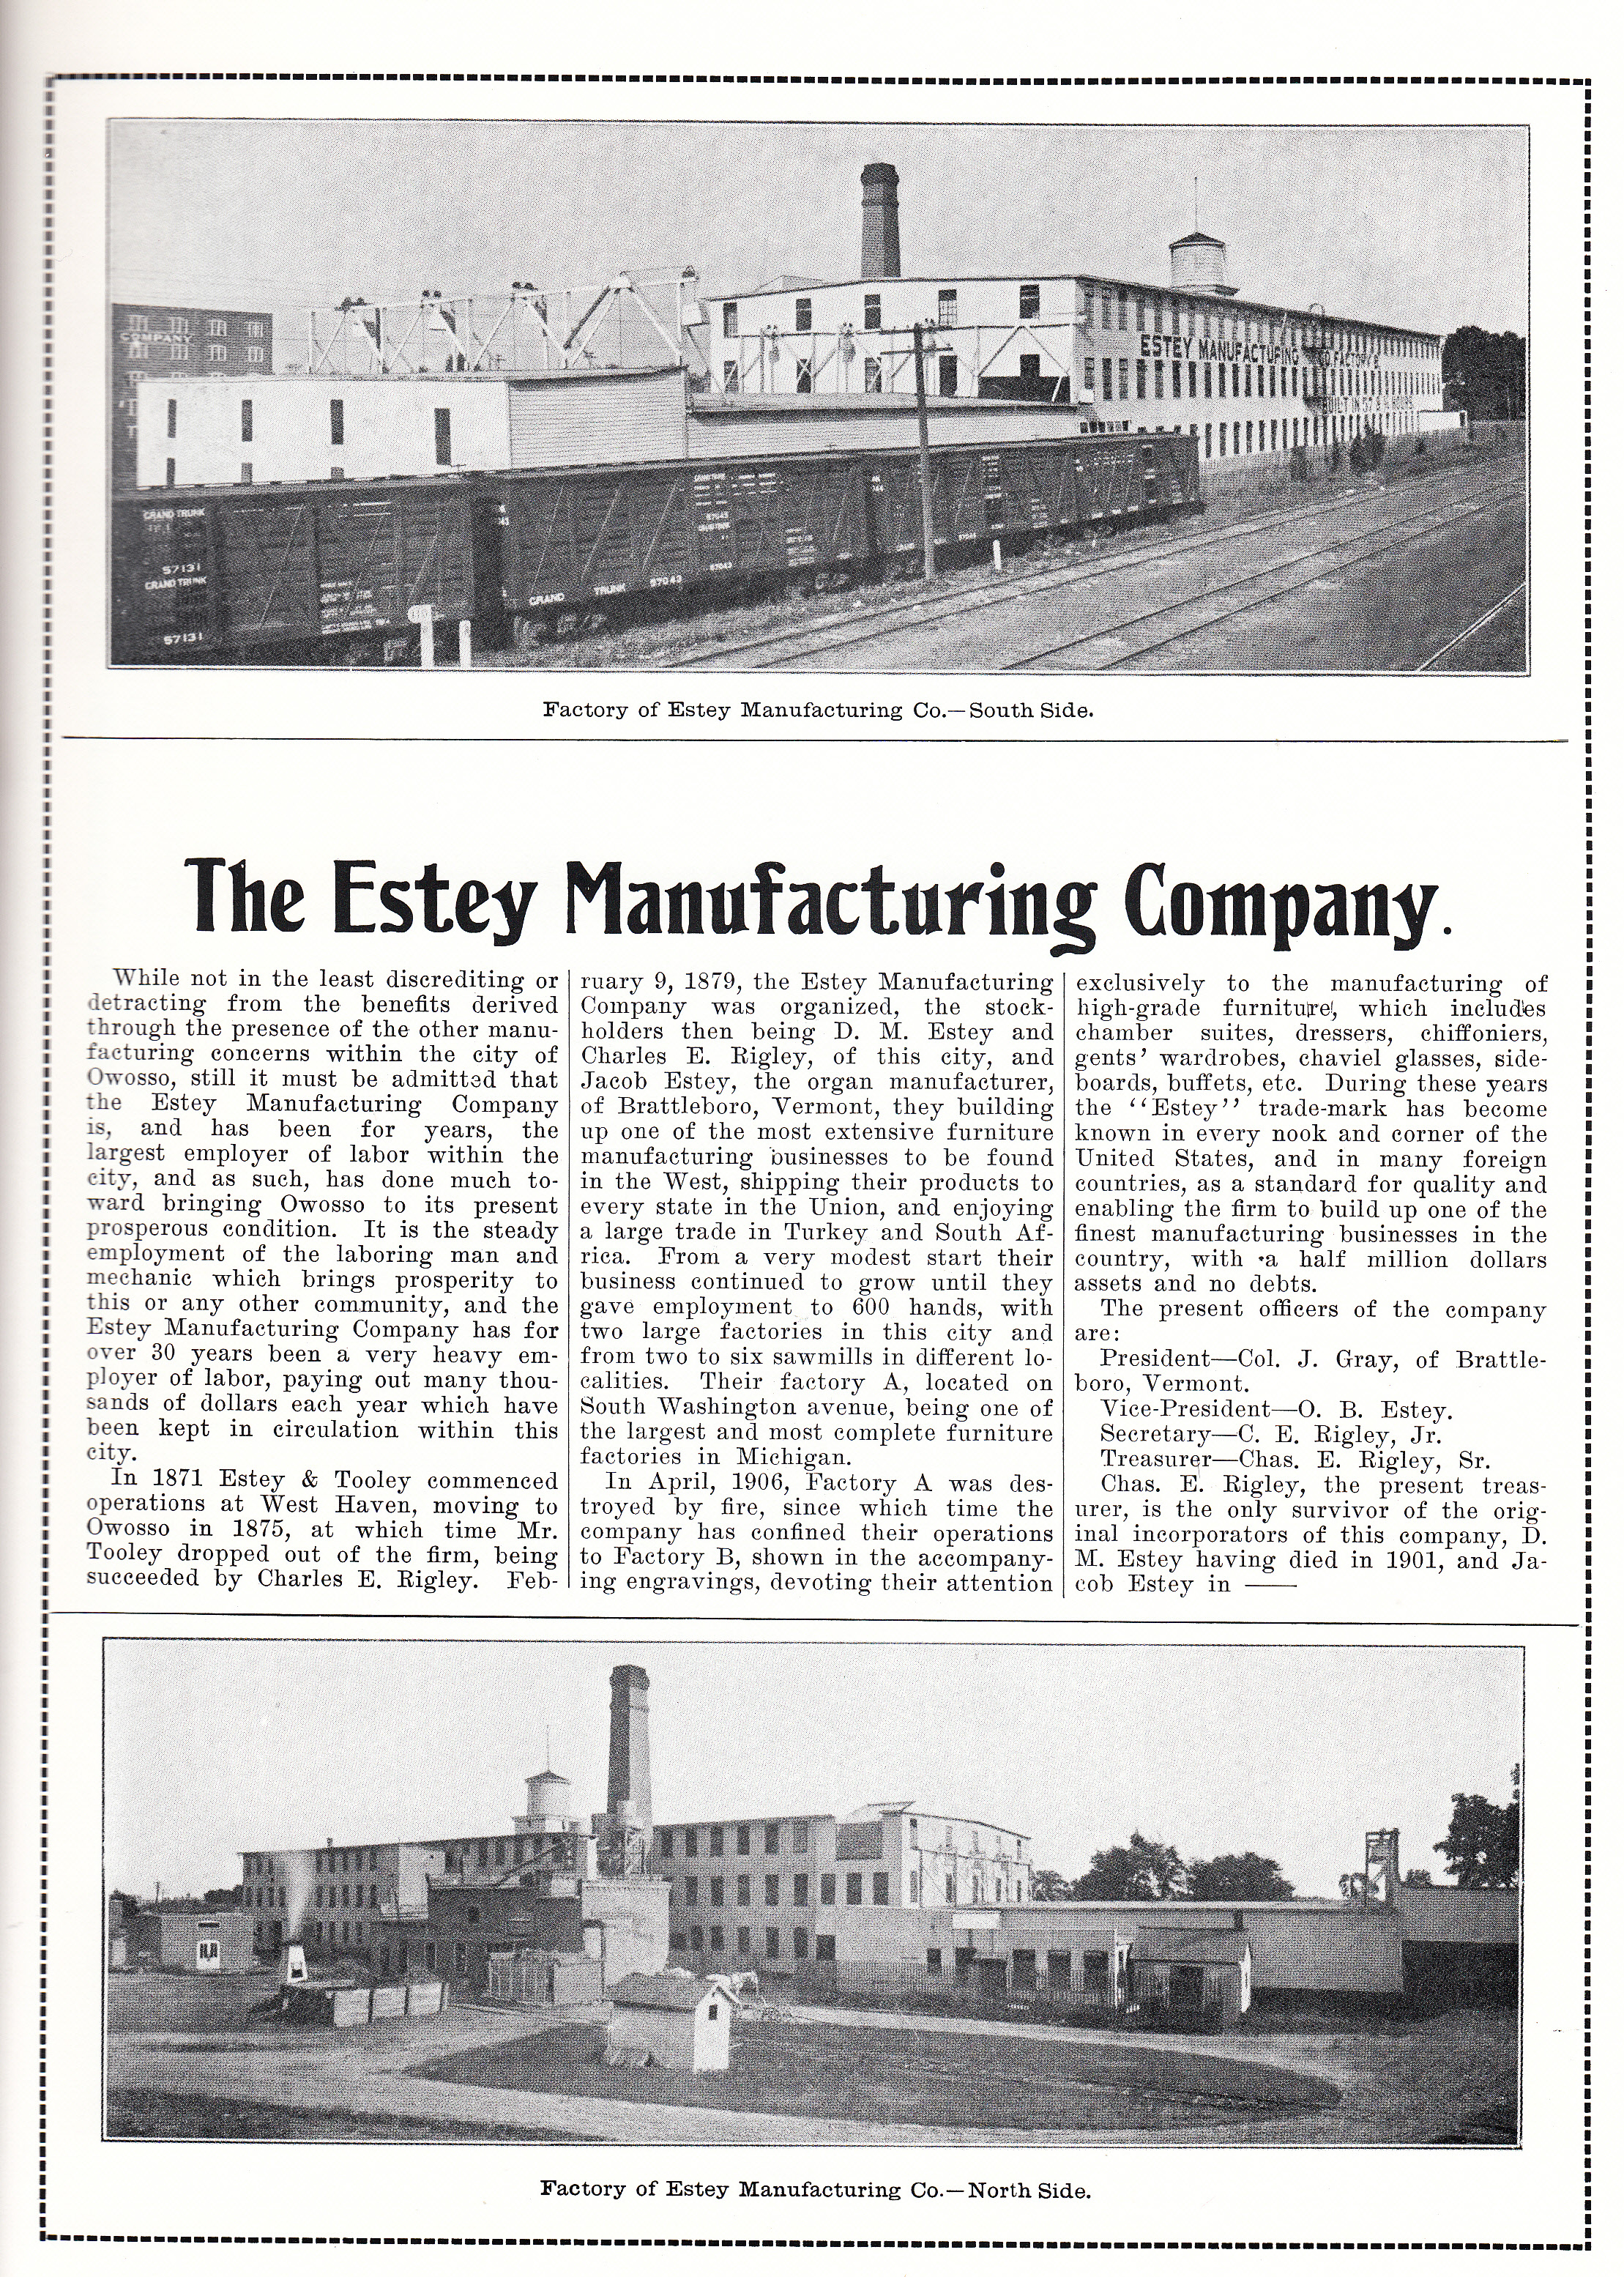 Estey Manufacturing Company article from Souvenir of Owosso, 1908.